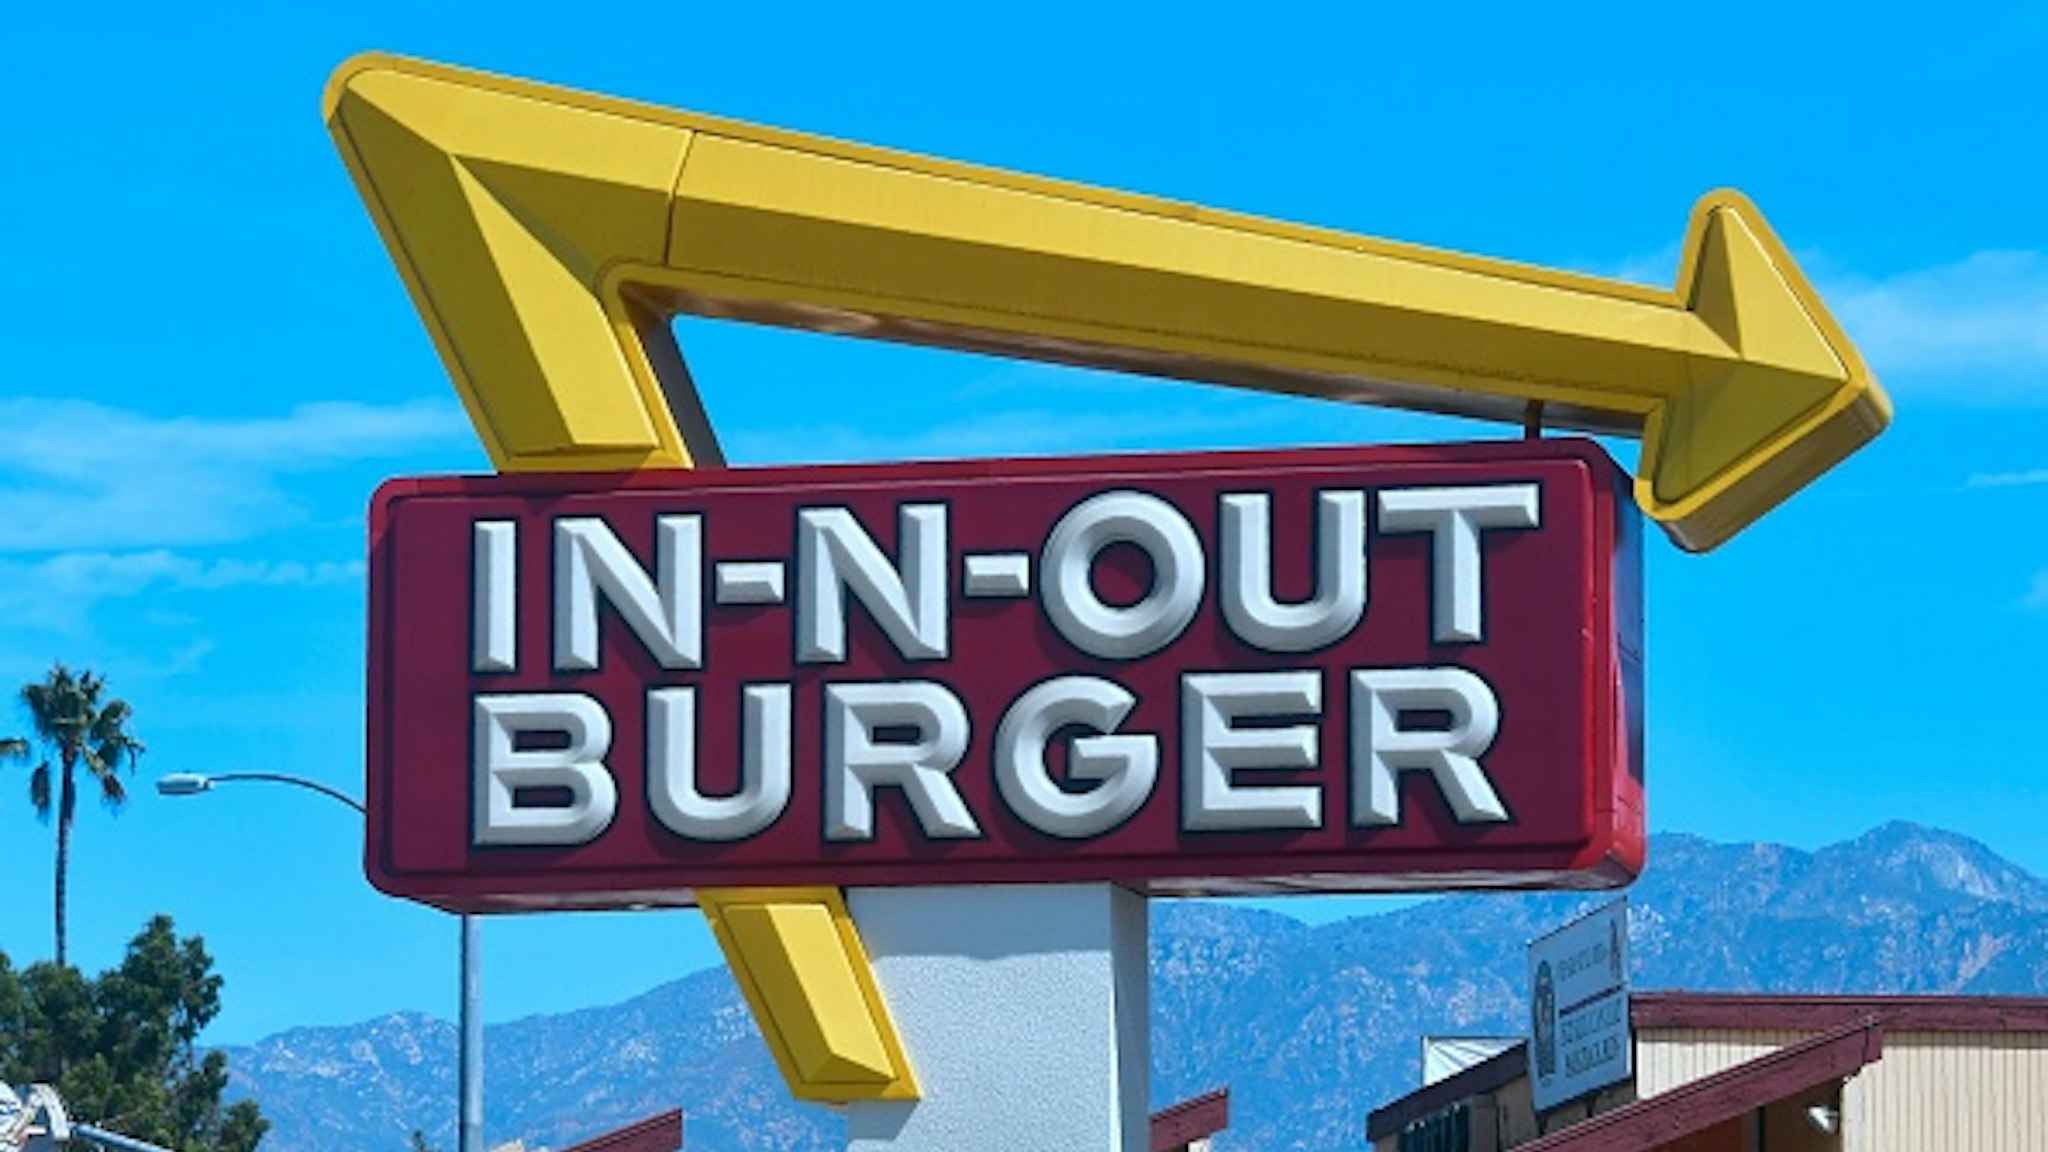 The signs points to an In-N-Out Burger restaurant in Alhambra, California on August 30, 2018. - Califoria's Democratic Party Chairman, Eric Bauman, is calling for a boycott of the Irvine, CA based fast food chain after it donated $25,000 to help California Republicans in November. In addition to this week's donation, In-N-Out donated $30,000 to the GOP in 2017 and 2016.